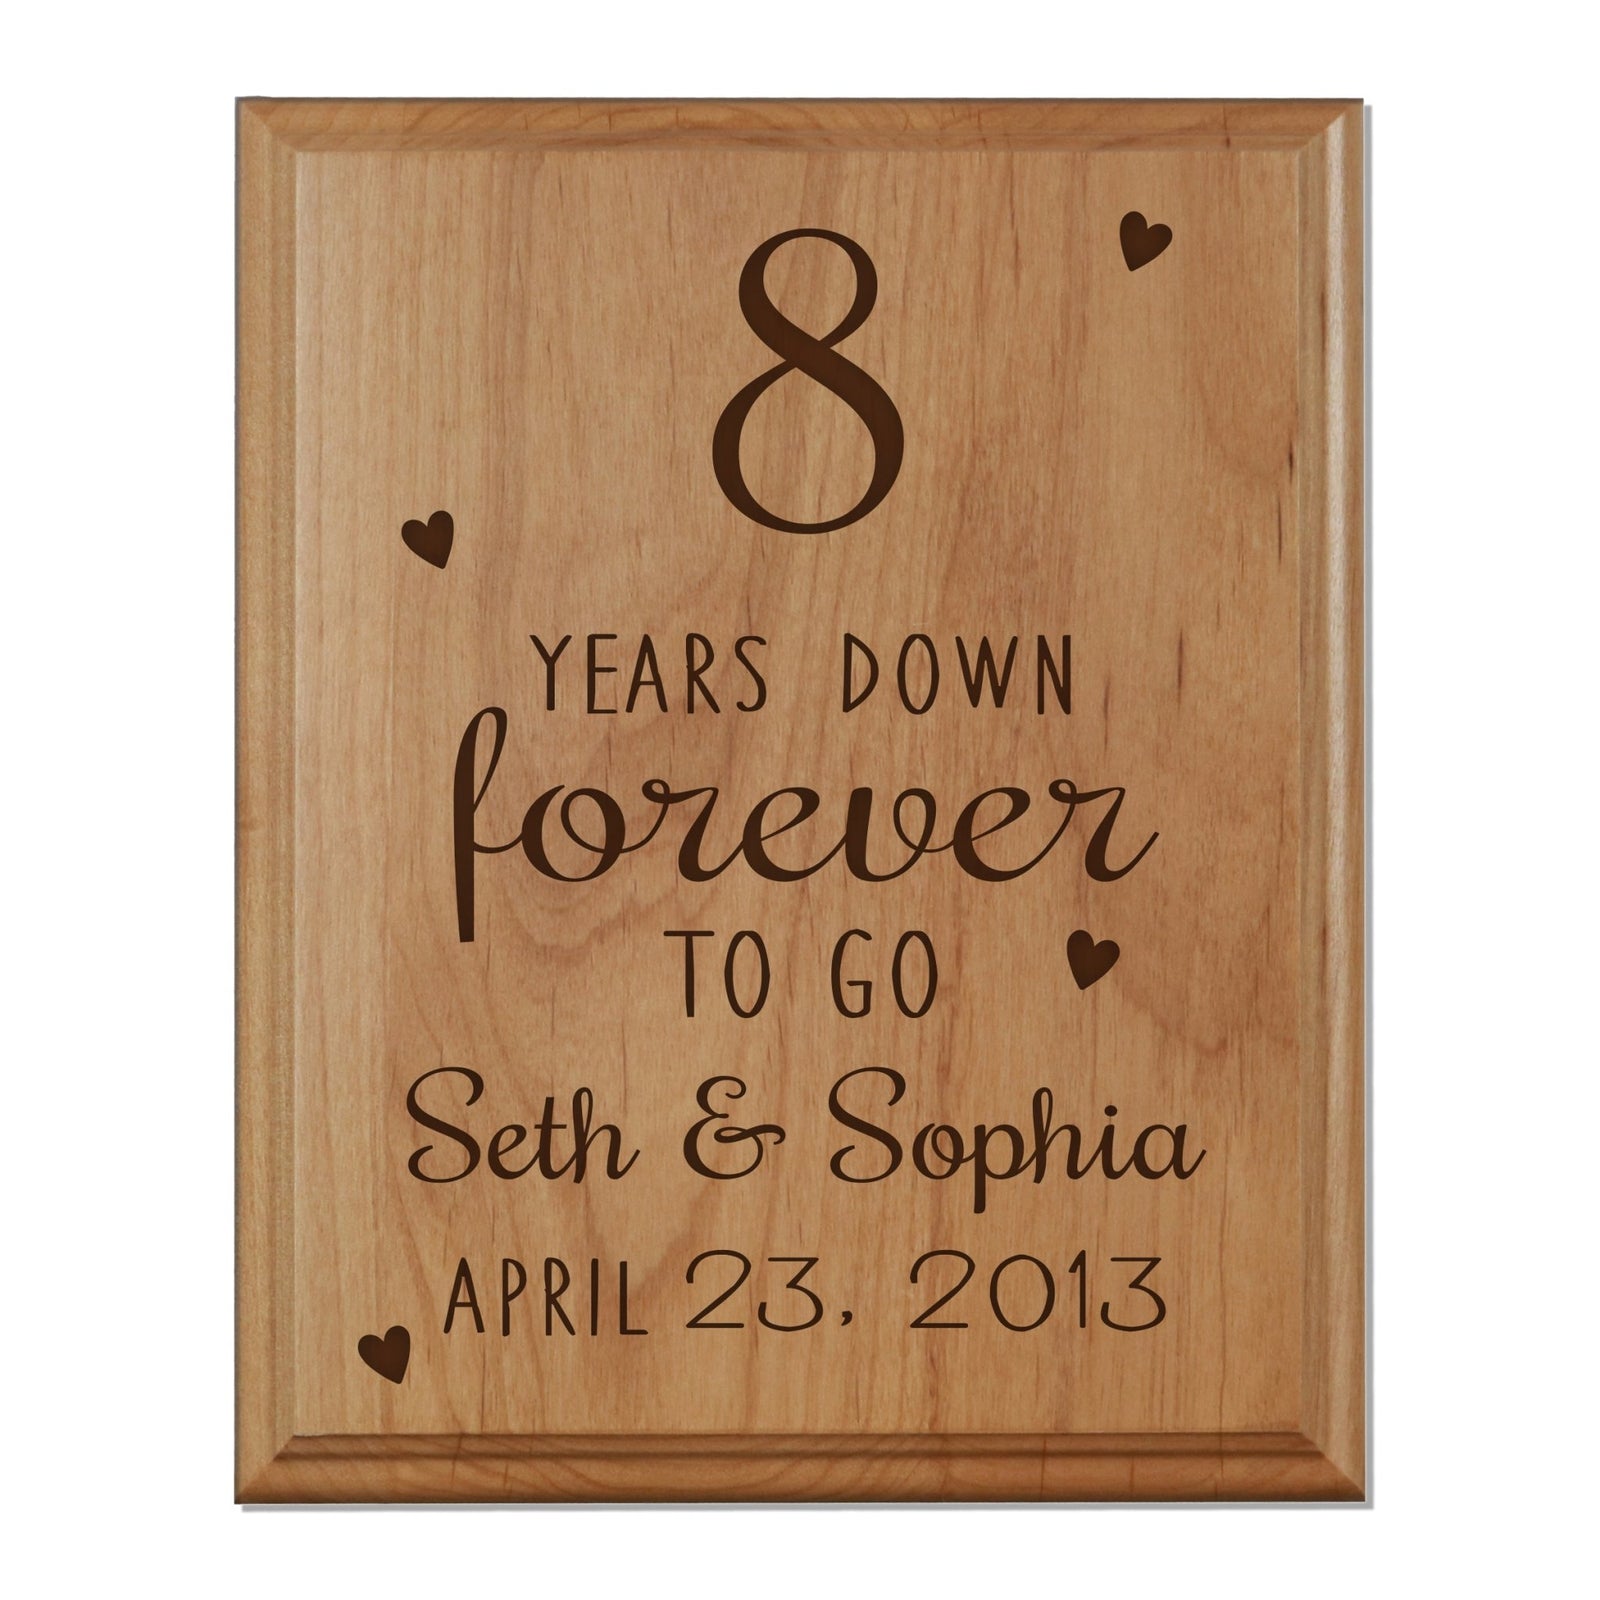 Personalized Wedding Anniversary Wall Plaque - 8th Anniversary - LifeSong Milestones